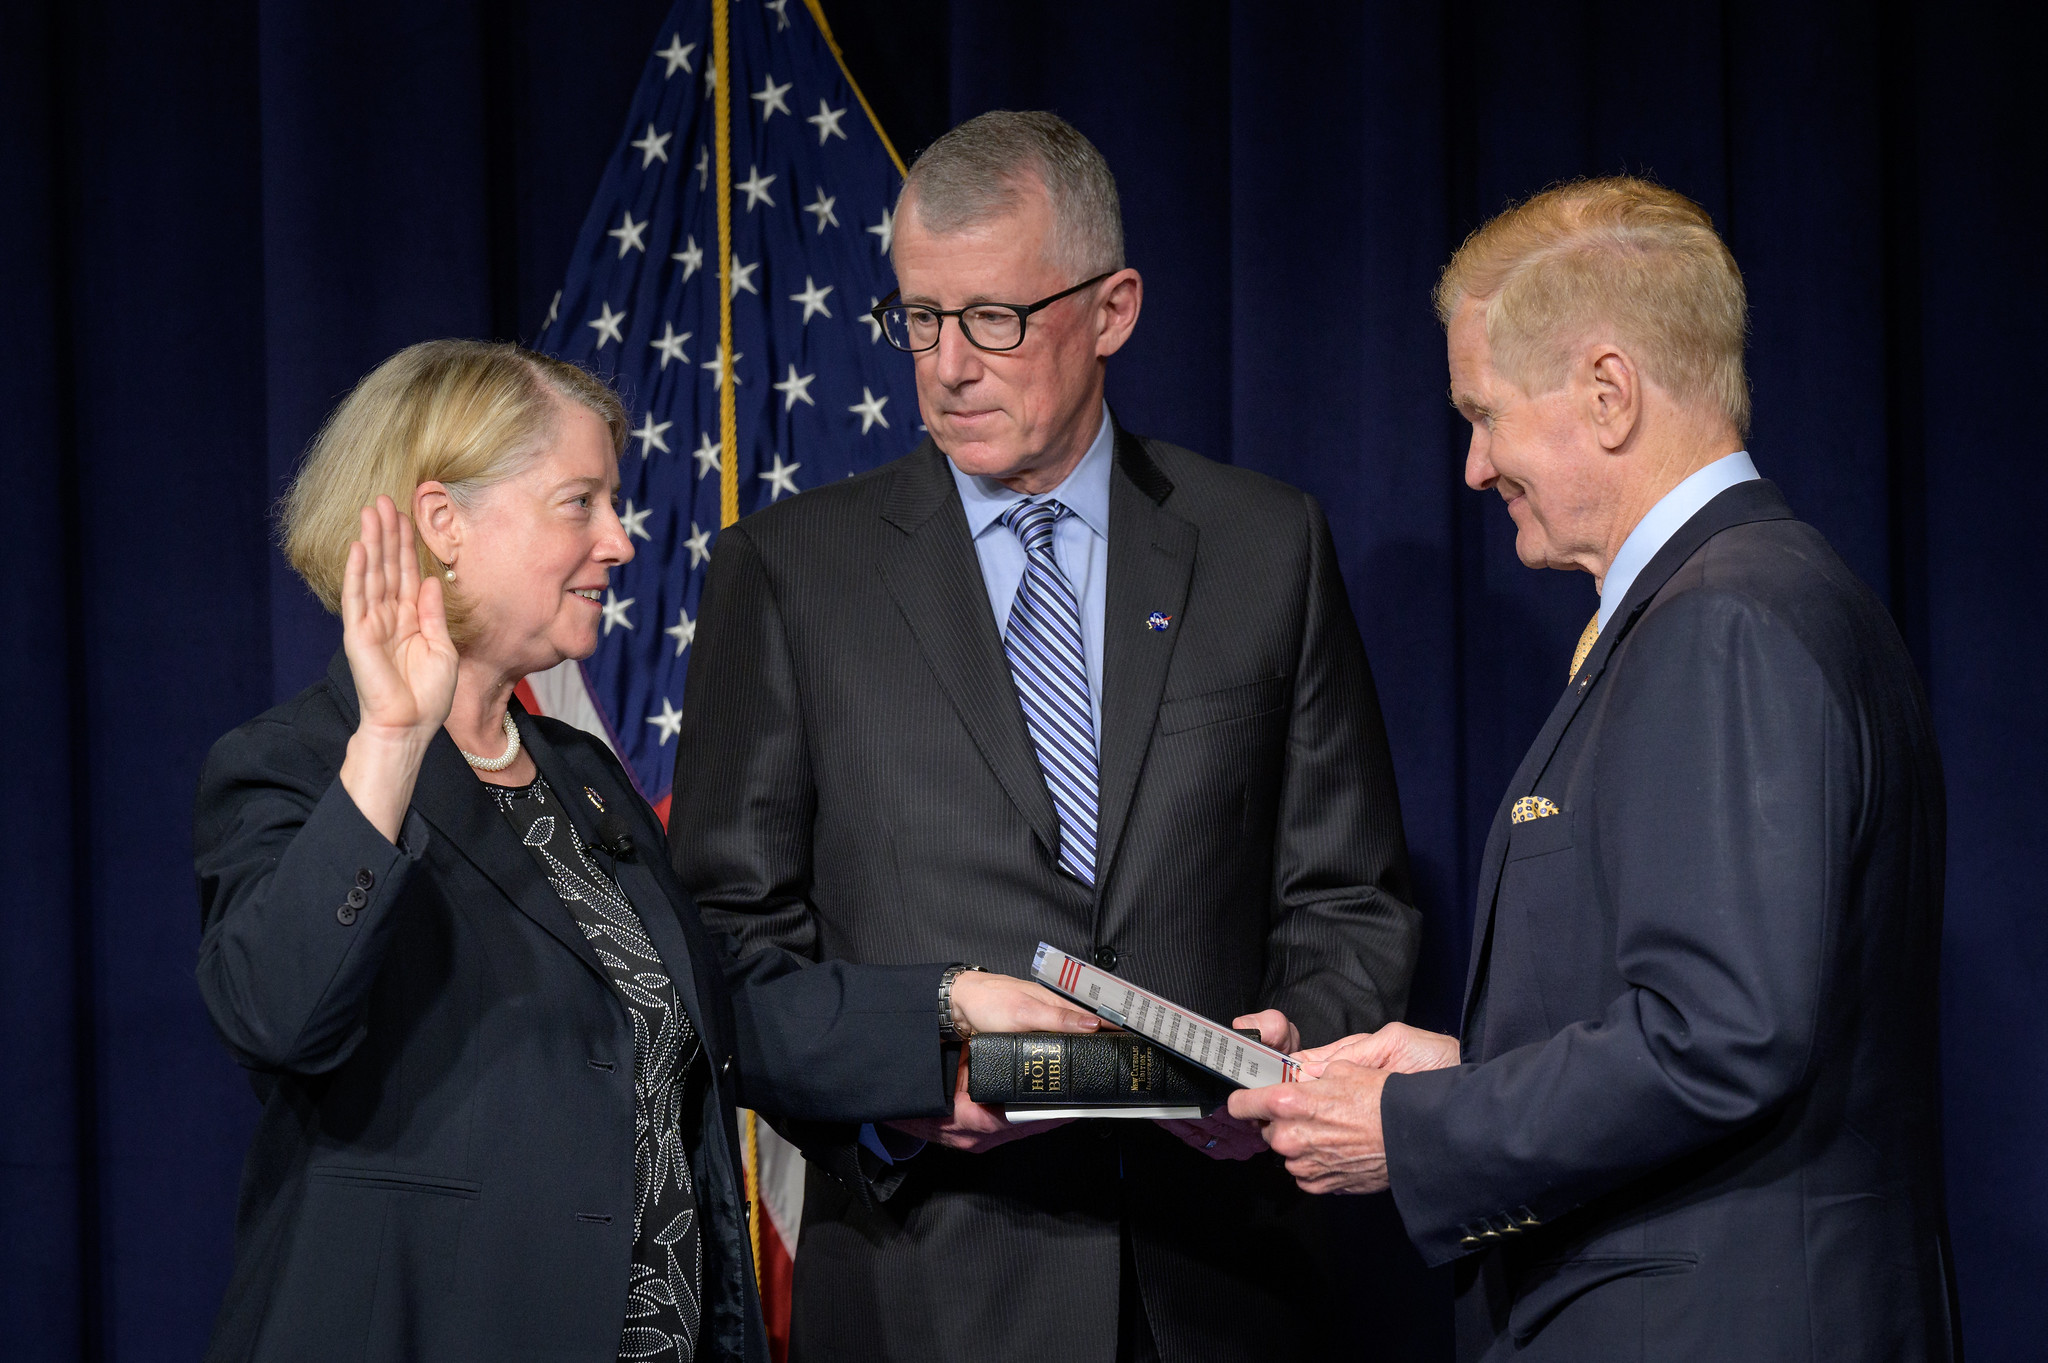 Pam Melroy is ceremonially sworn-in as the 15th NASA Deputy Administrator by NASA Administrator Bill Nelson, as her husband Doug Hollett, holds their family Bible, Monday, June 21, 2021, at the Mary W. Jackson NASA Headquarters building in Washington.